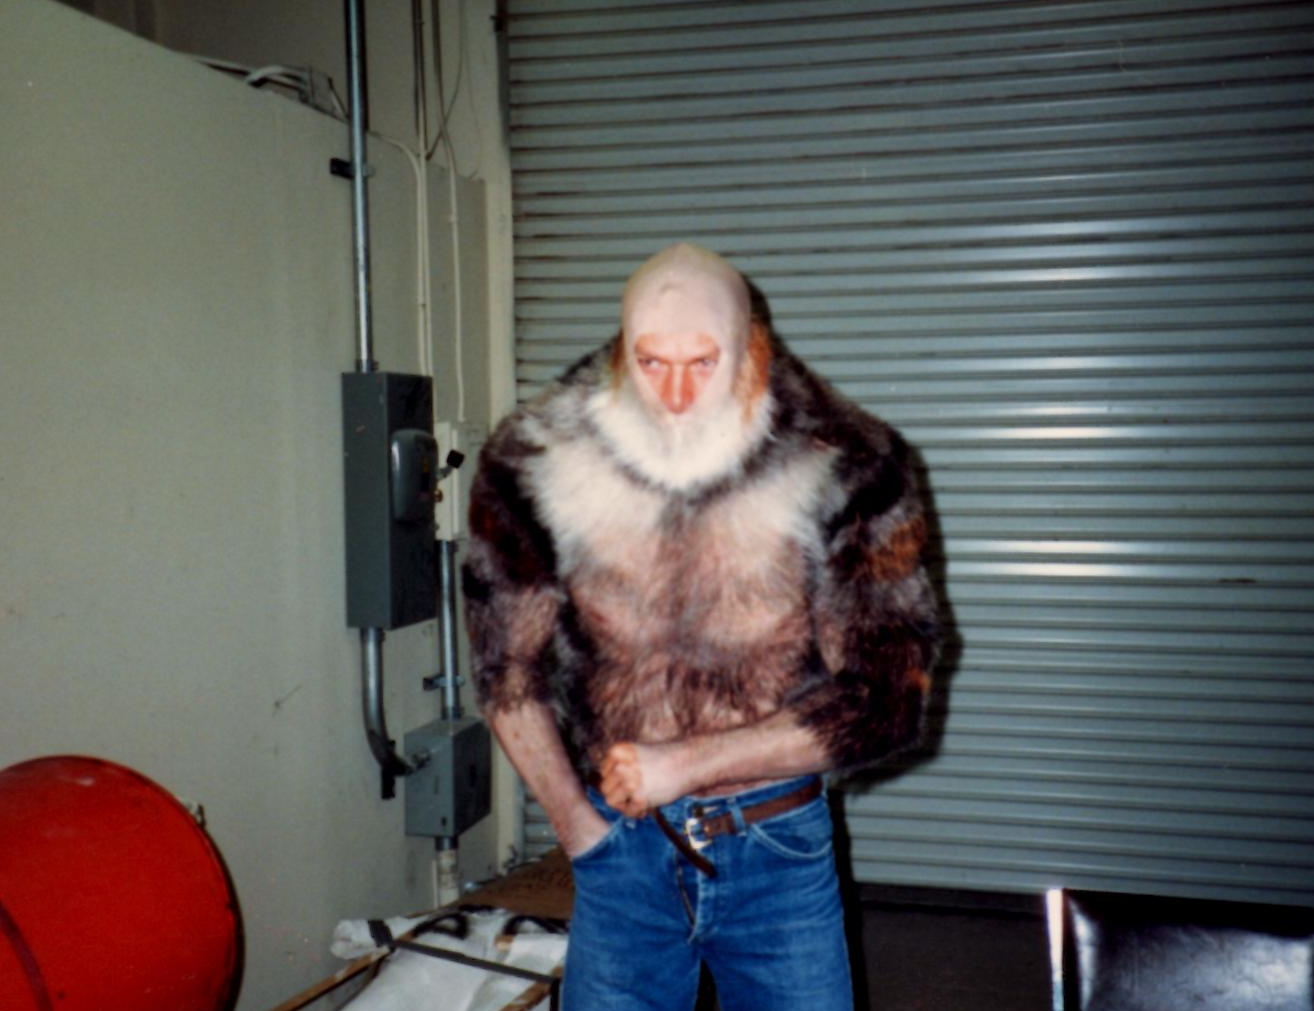 First time trying on Wolfman body suit...minus head and gloves/hands.